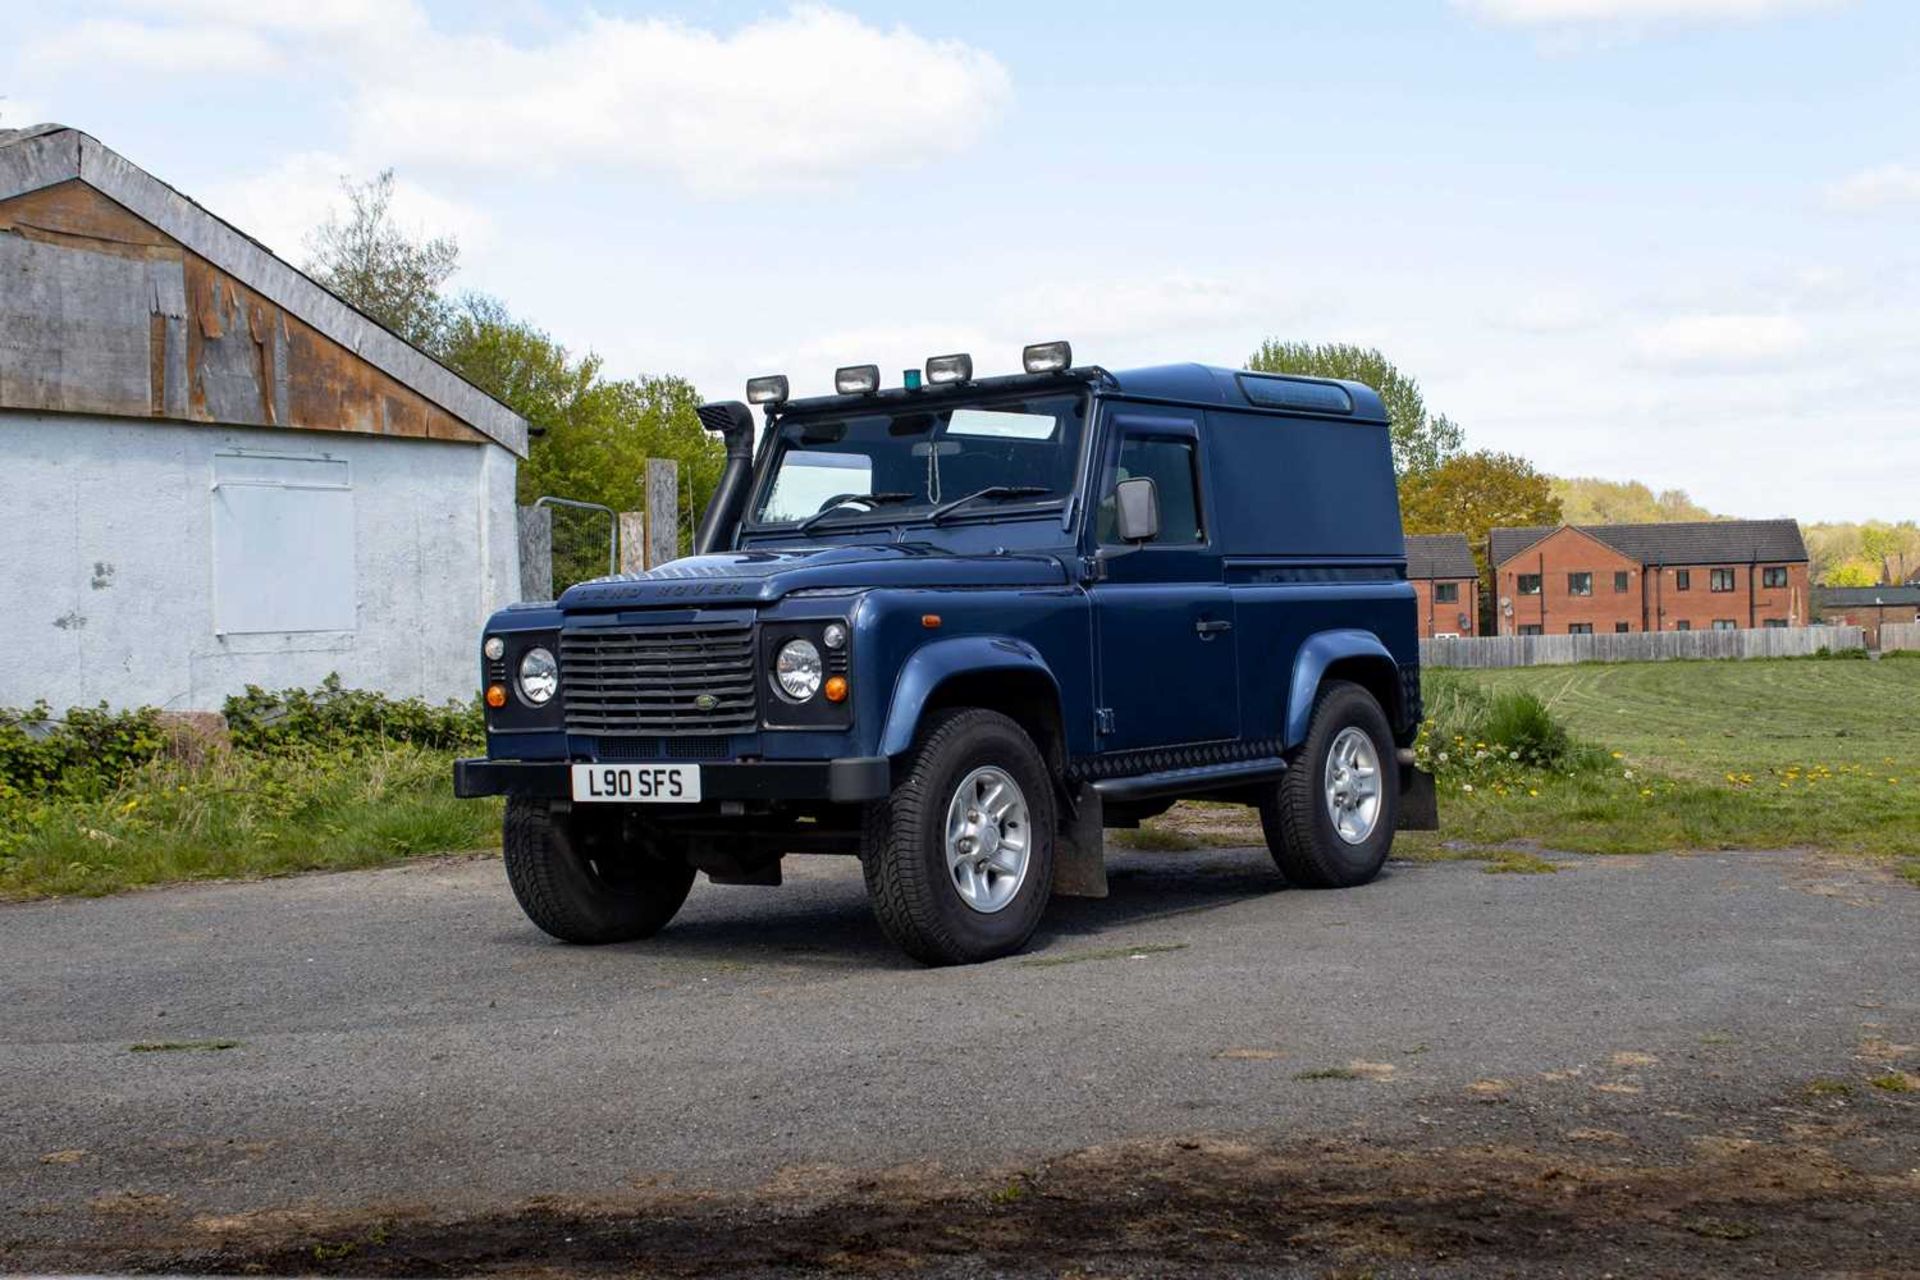 2007 Land Rover Defender 90 County  Powered by the 2.4-litre TDCi unit and features numerous tastefu - Image 5 of 76